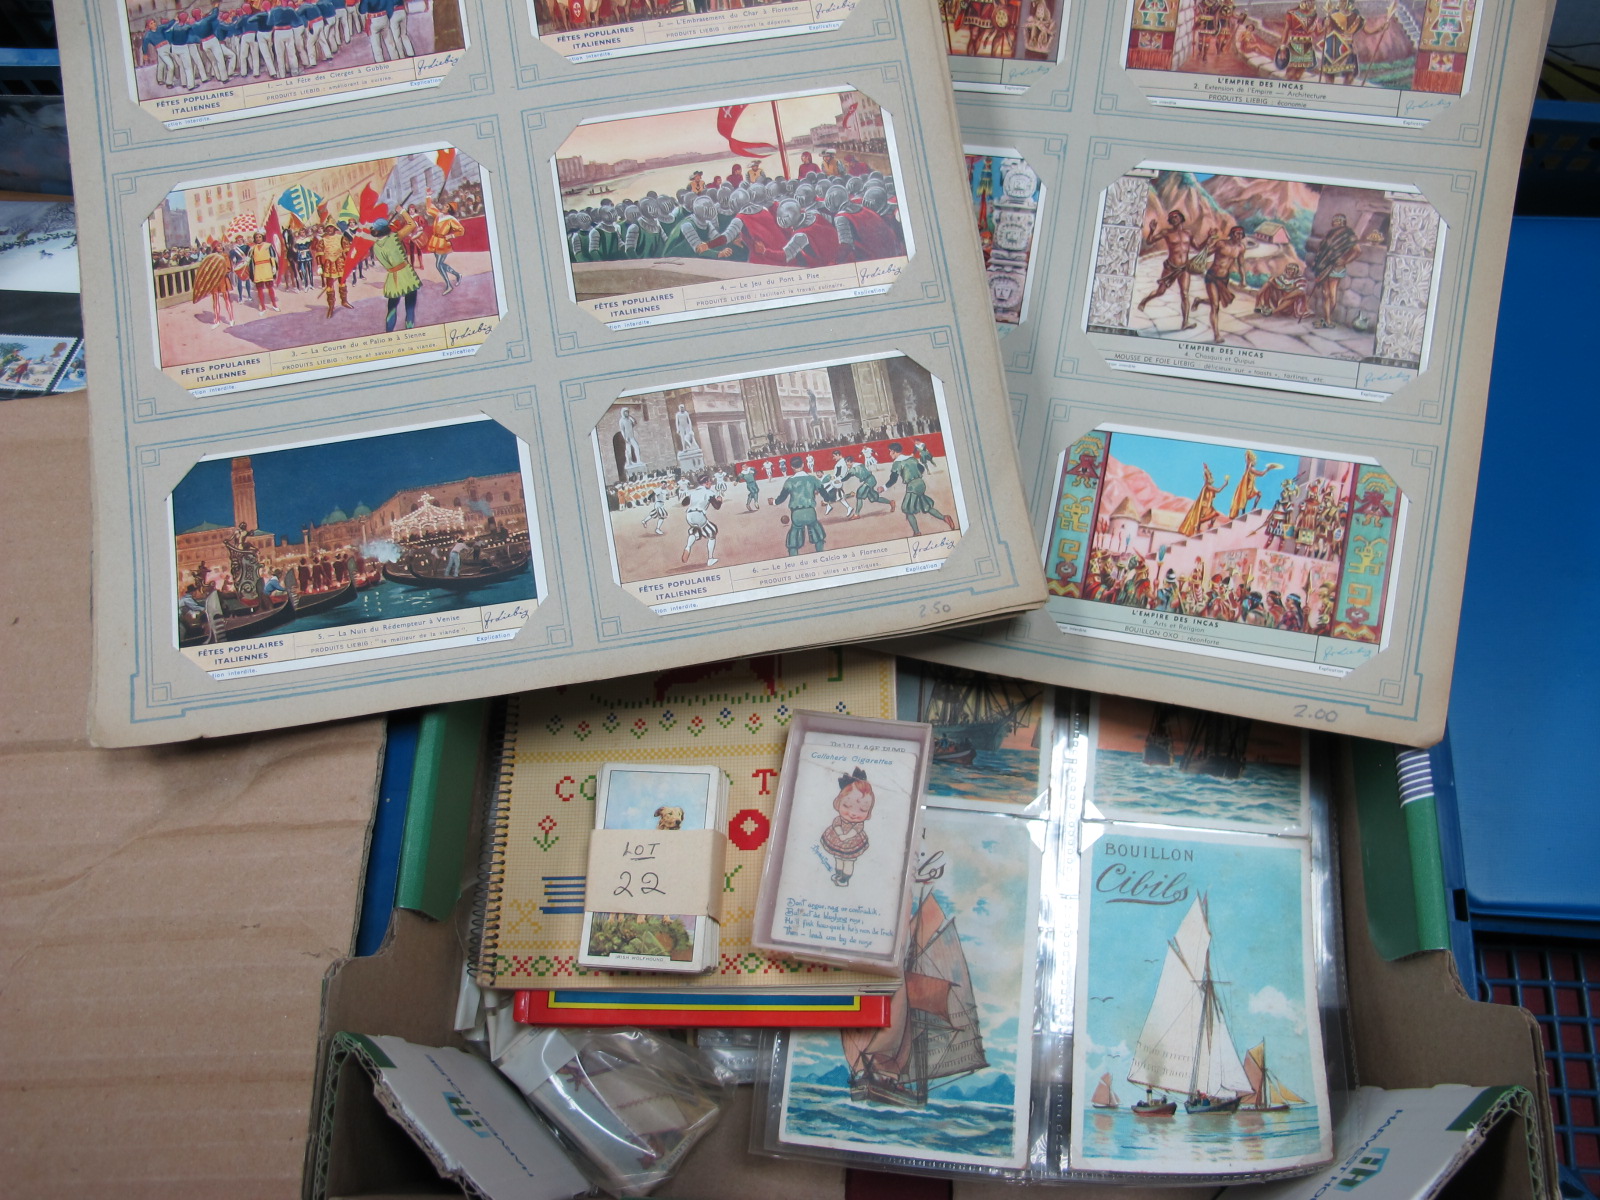 A Quantity of Mainly Pre-War Cigarette Cards, both British and European including Wills, Phillips